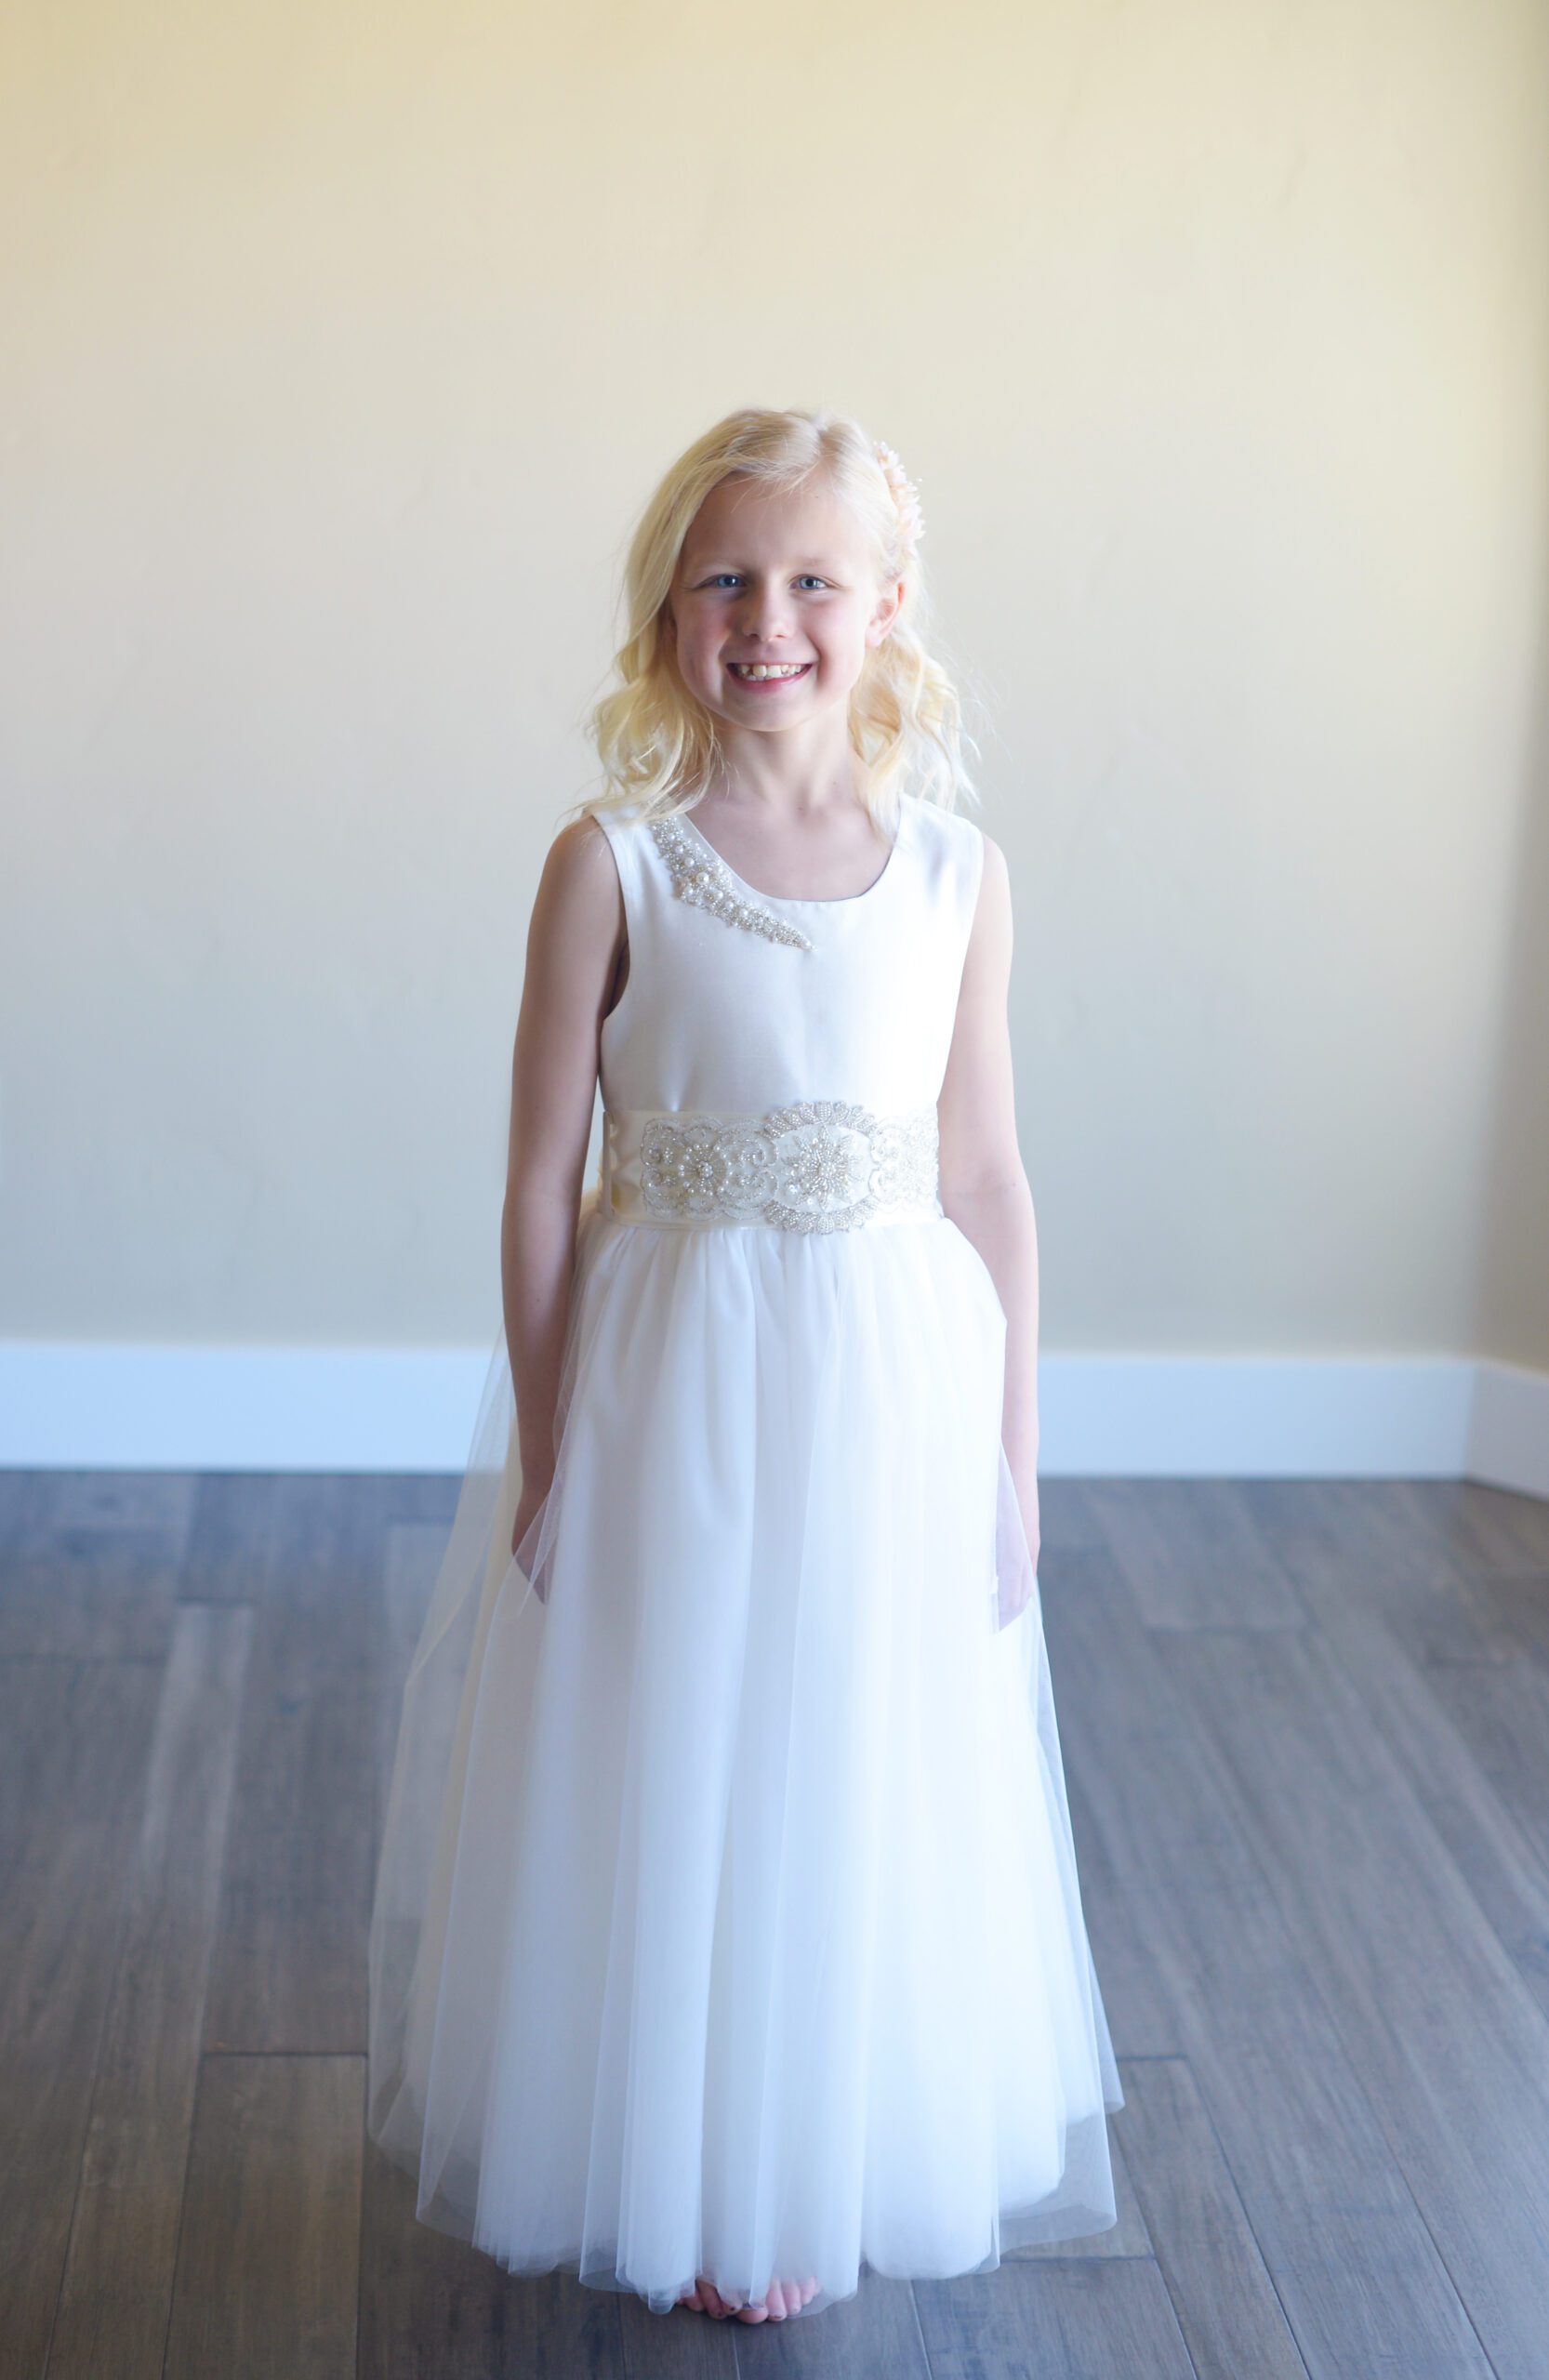 A photo of an 8 year old girl wearing a silk flower girl or first communion dress with a diamante sash